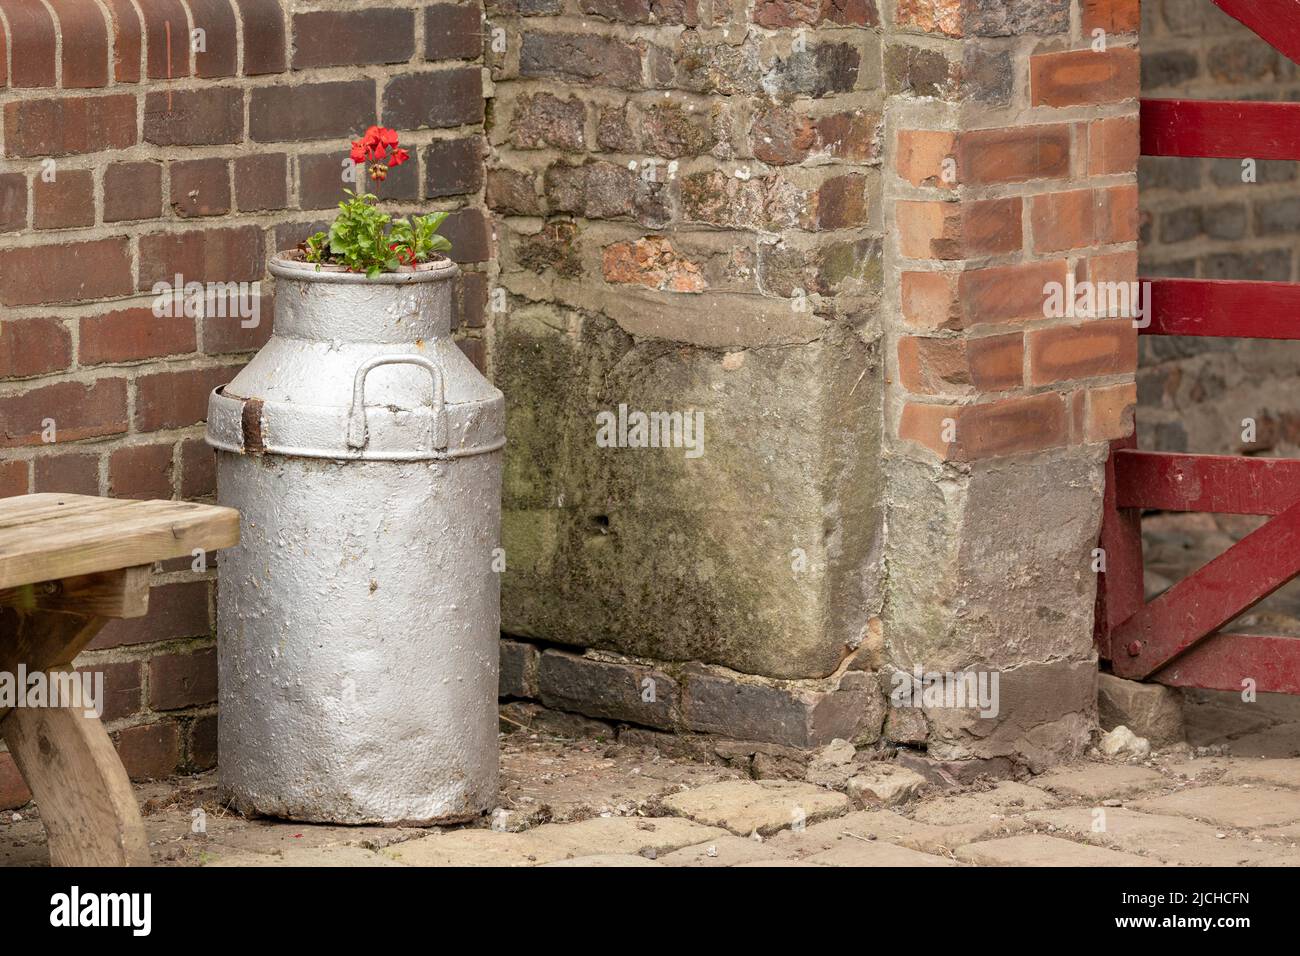 old milk churn used as a flower pot Stock Photo